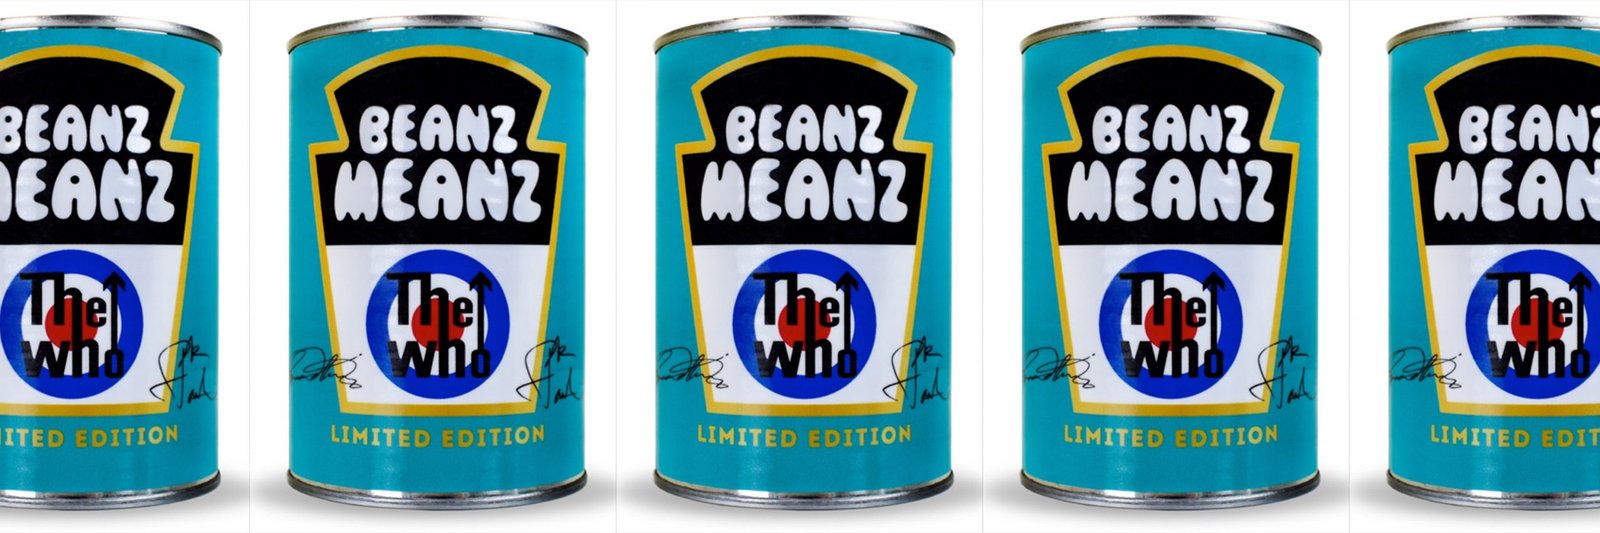 BEANZ MEANZ THE WHO – HEINZ BEANZ & THE WHO – LIMITED EDITION CHARITY CANS TO CELEBRATE 'THE WHO SELL OUT' – R o c k 'N' L o a d